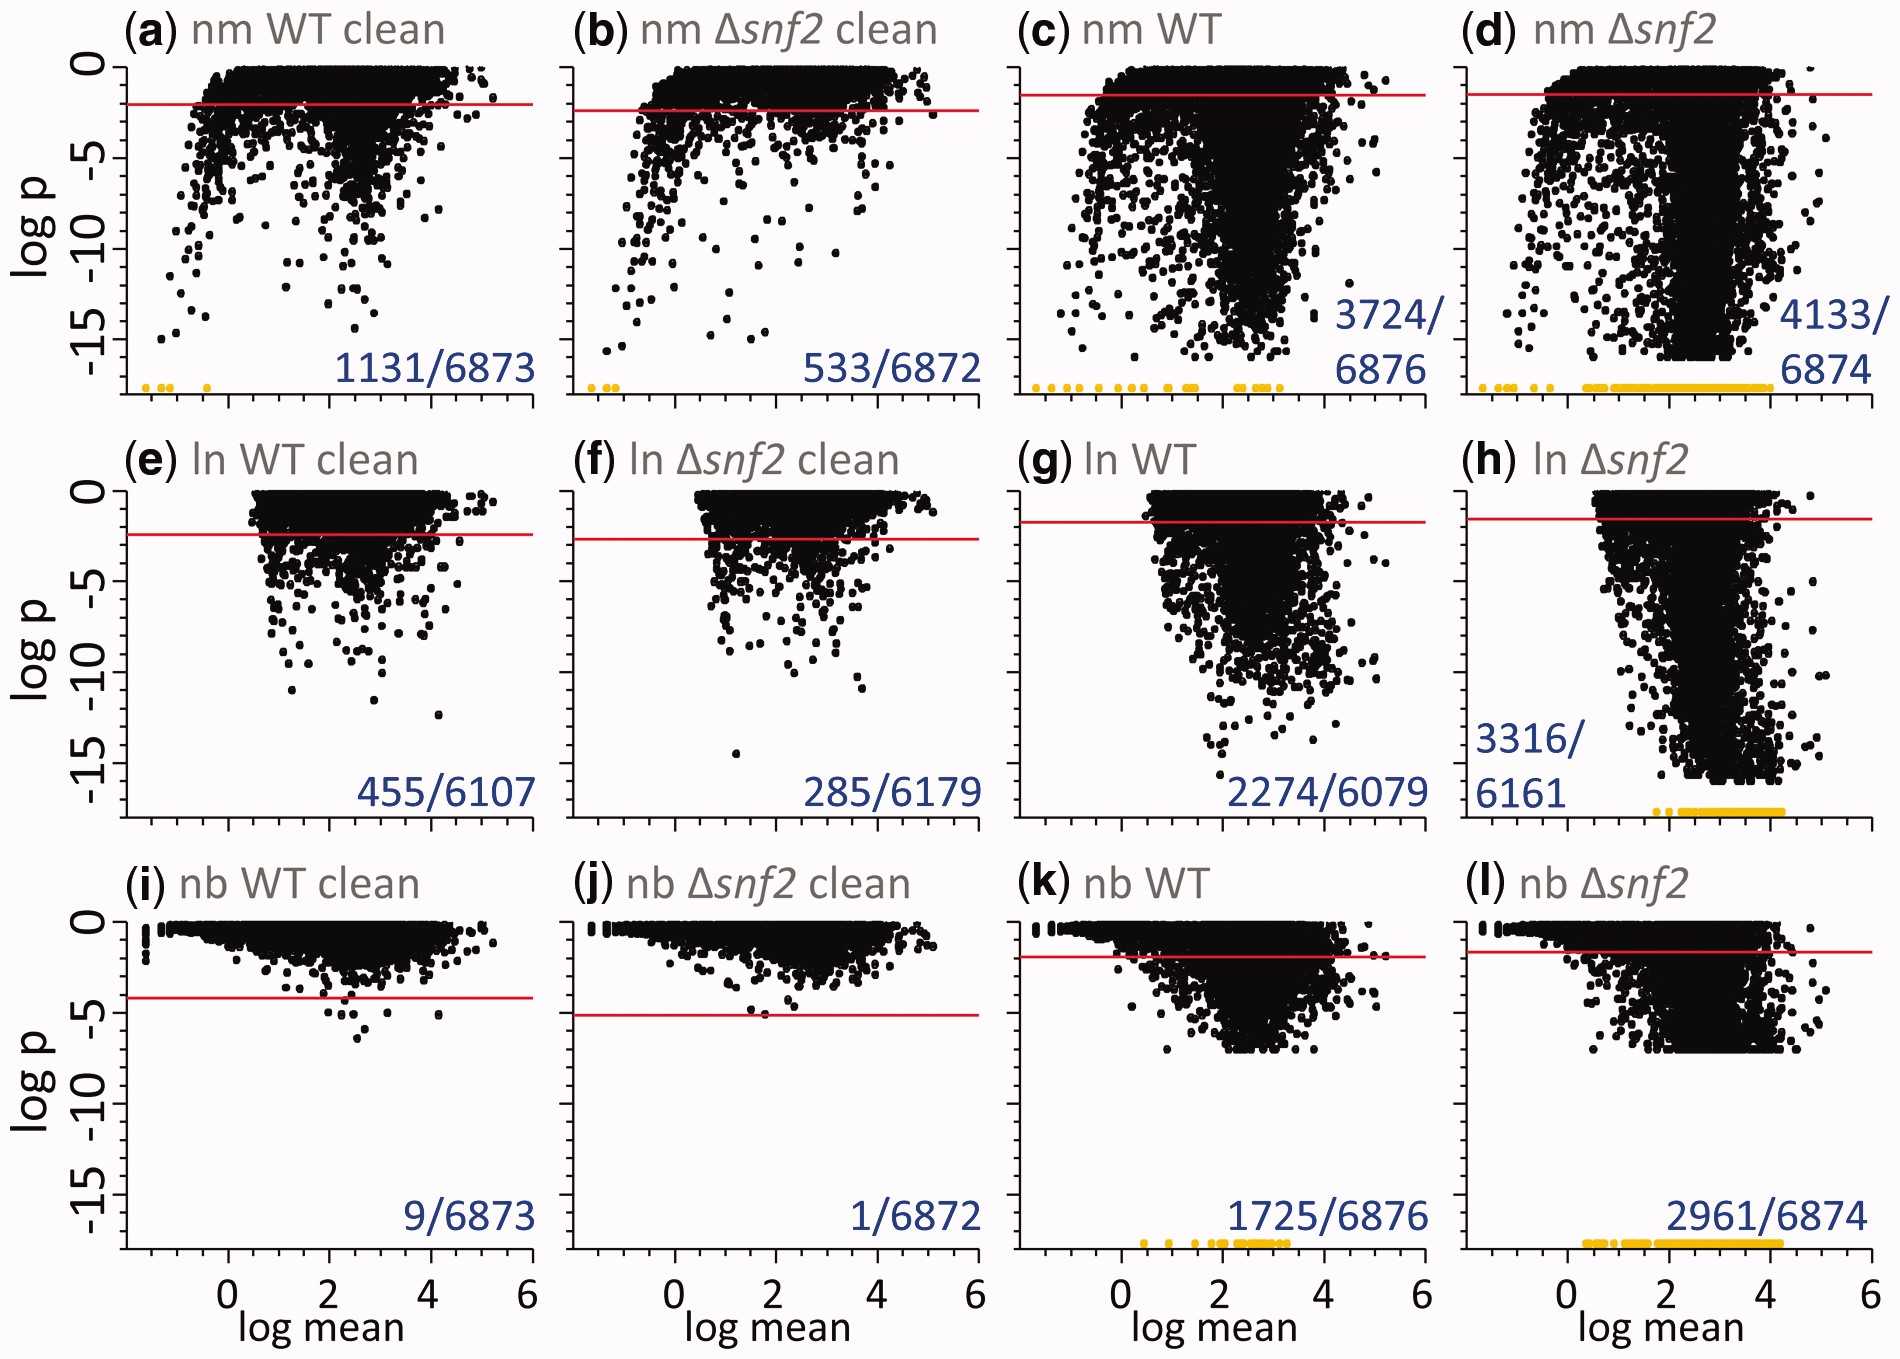 Figure 5 from [@Gierlinski2015]. Goodness-of-fit test results for normal (top panels), log-normal (middle panels) and negative binomial (bottom panels) distributions. Each panel shows the test P-value versus the mean count across replicates. Each dot represents equal-count normalized data from one gene. Panels on the left (a, b, e, f, i, j) show clean data with bad replicates rejected (42 and 44 replicates remaining in WT and Δsnf2, respectively). Panels on the right (c, d, g, h, k, l) show all available data (48 replicates in each condition). Due to the number of bootstraps performed, P-values for the negative-binomial test are limited to ∼10−2. Due to numerical precision of the software library used, P-values from the normal and log-normal tests are limited to ∼10−16. Below these limits data points are marked in orange (light gray in black and white) at the bottom of each panel. Horizontal lines show the Benjamini–Hochberg limit corresponding to the significance of 0.05 for the given dataset. The numbers in the right bottom corner of each panel indicate the number of genes with P-values below the significance limit and the total number of genes